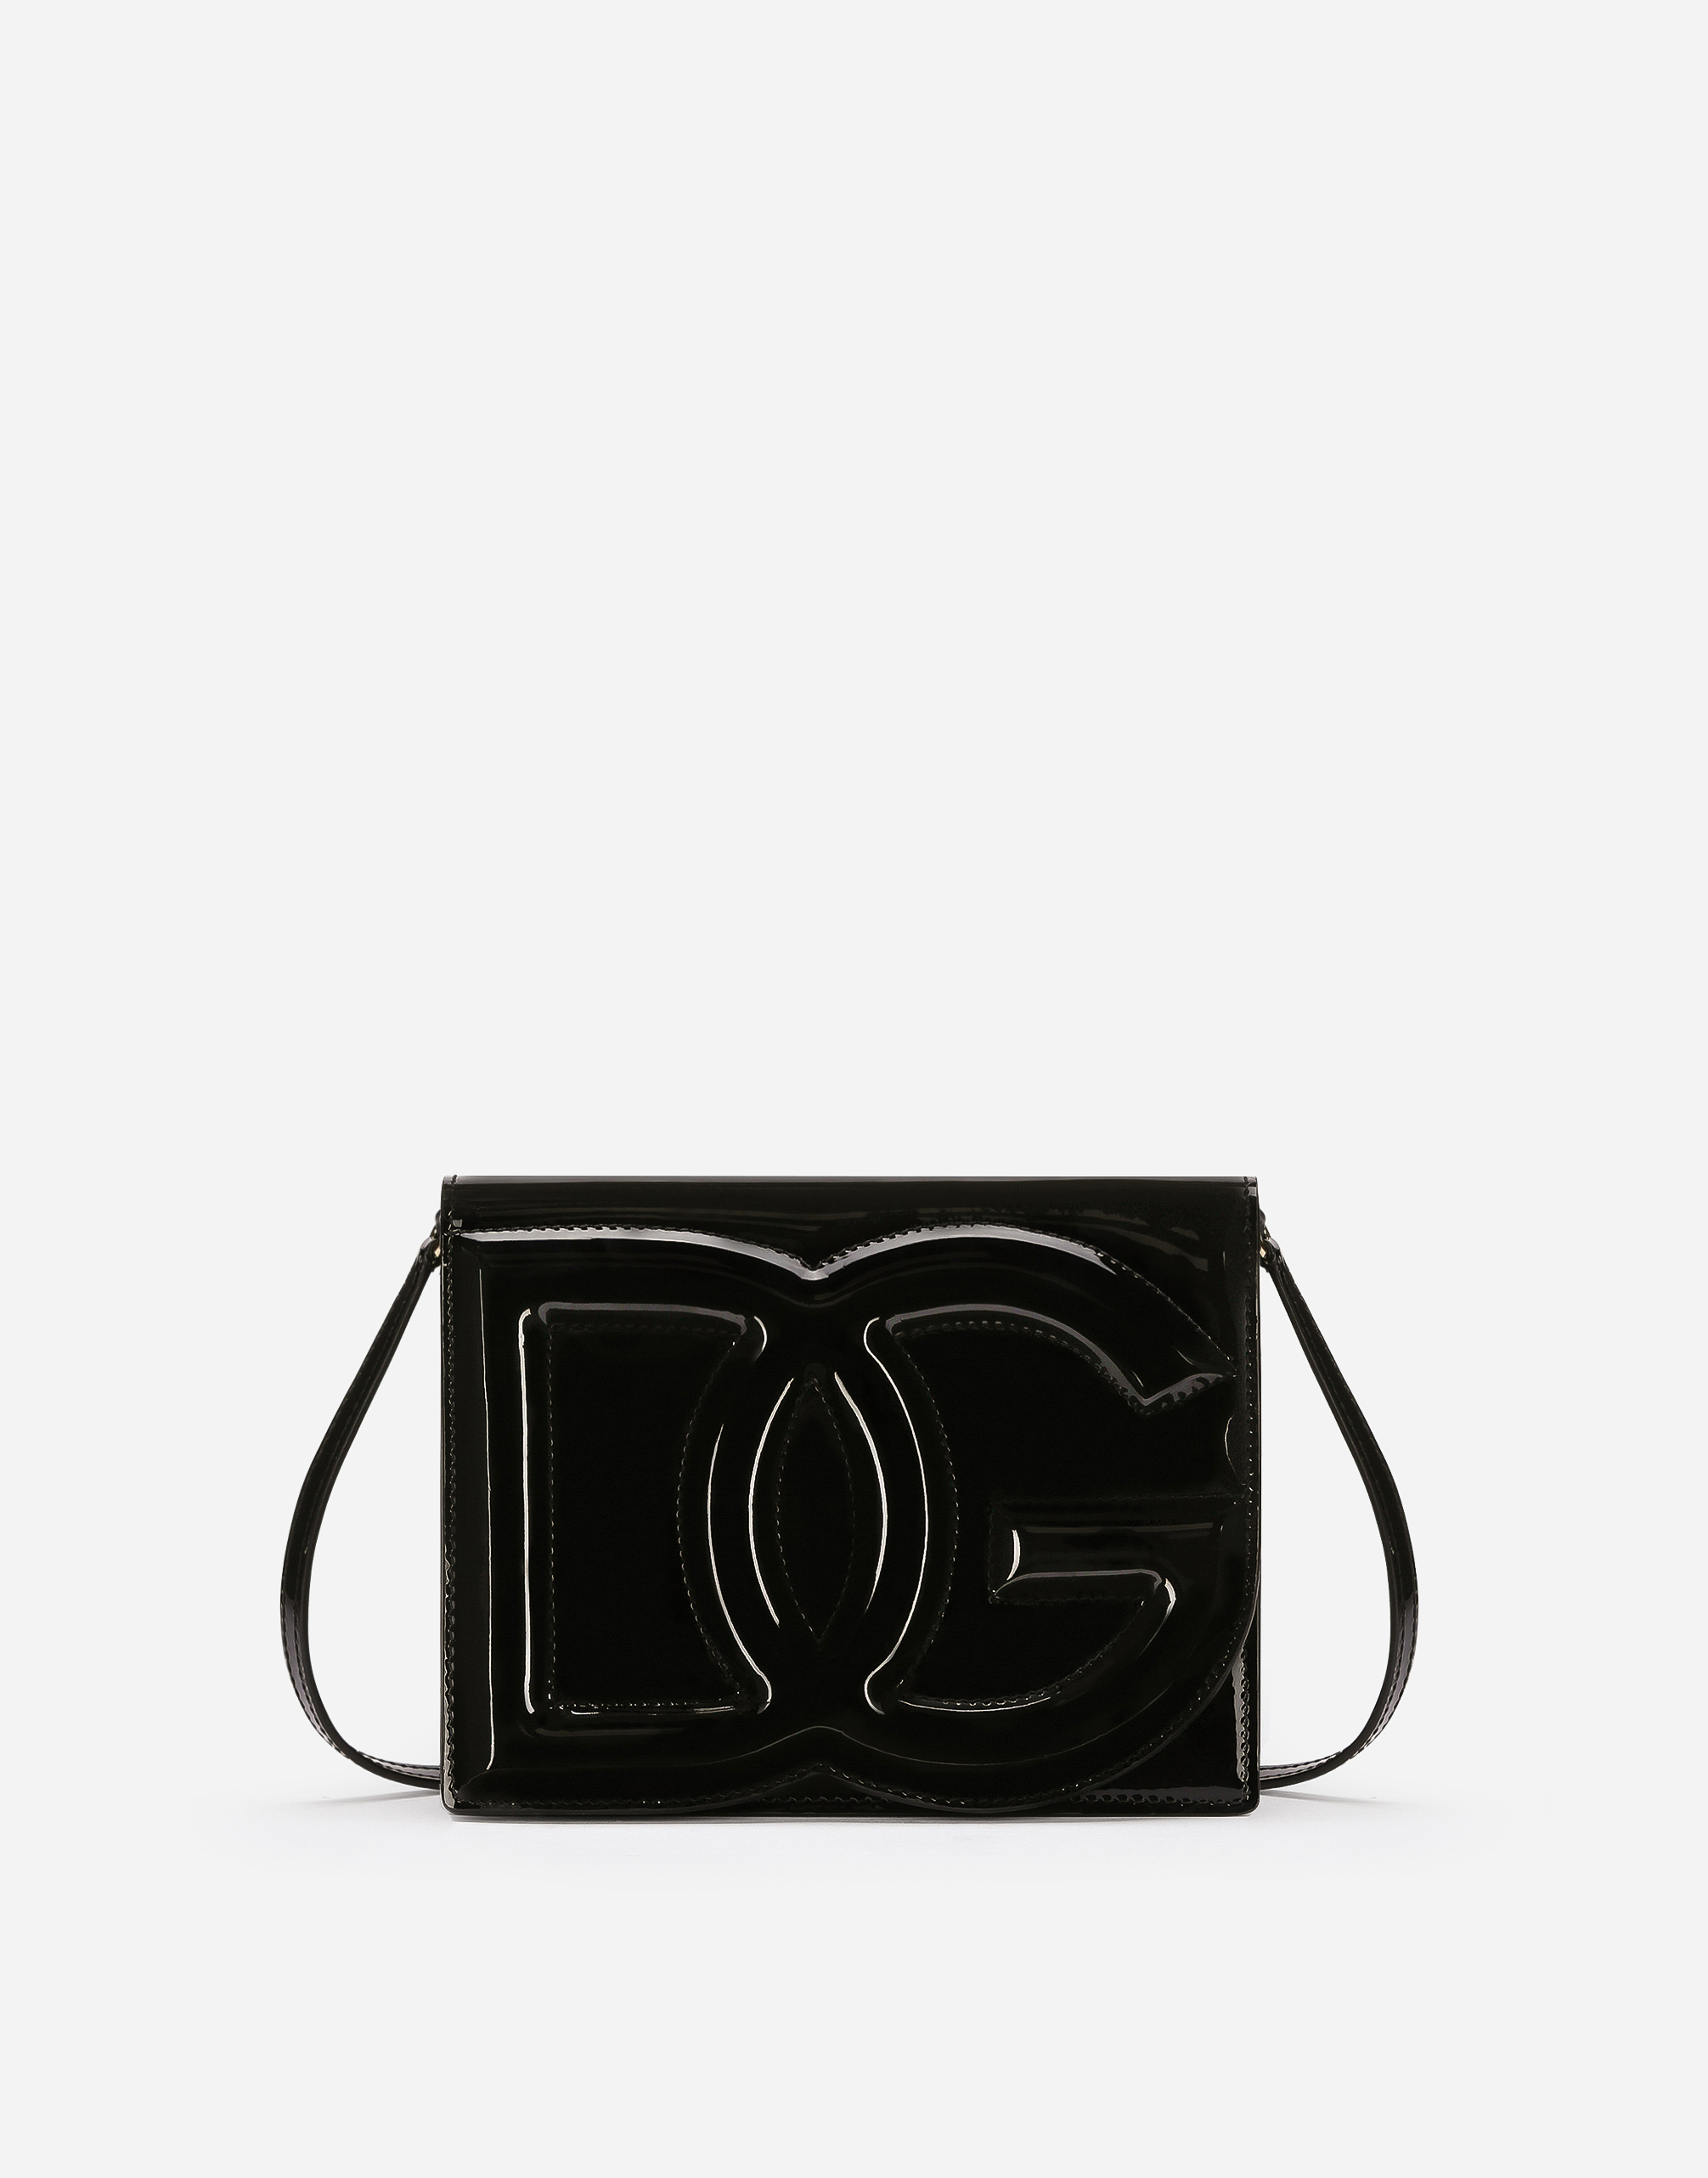 chanel patent leather tote bag